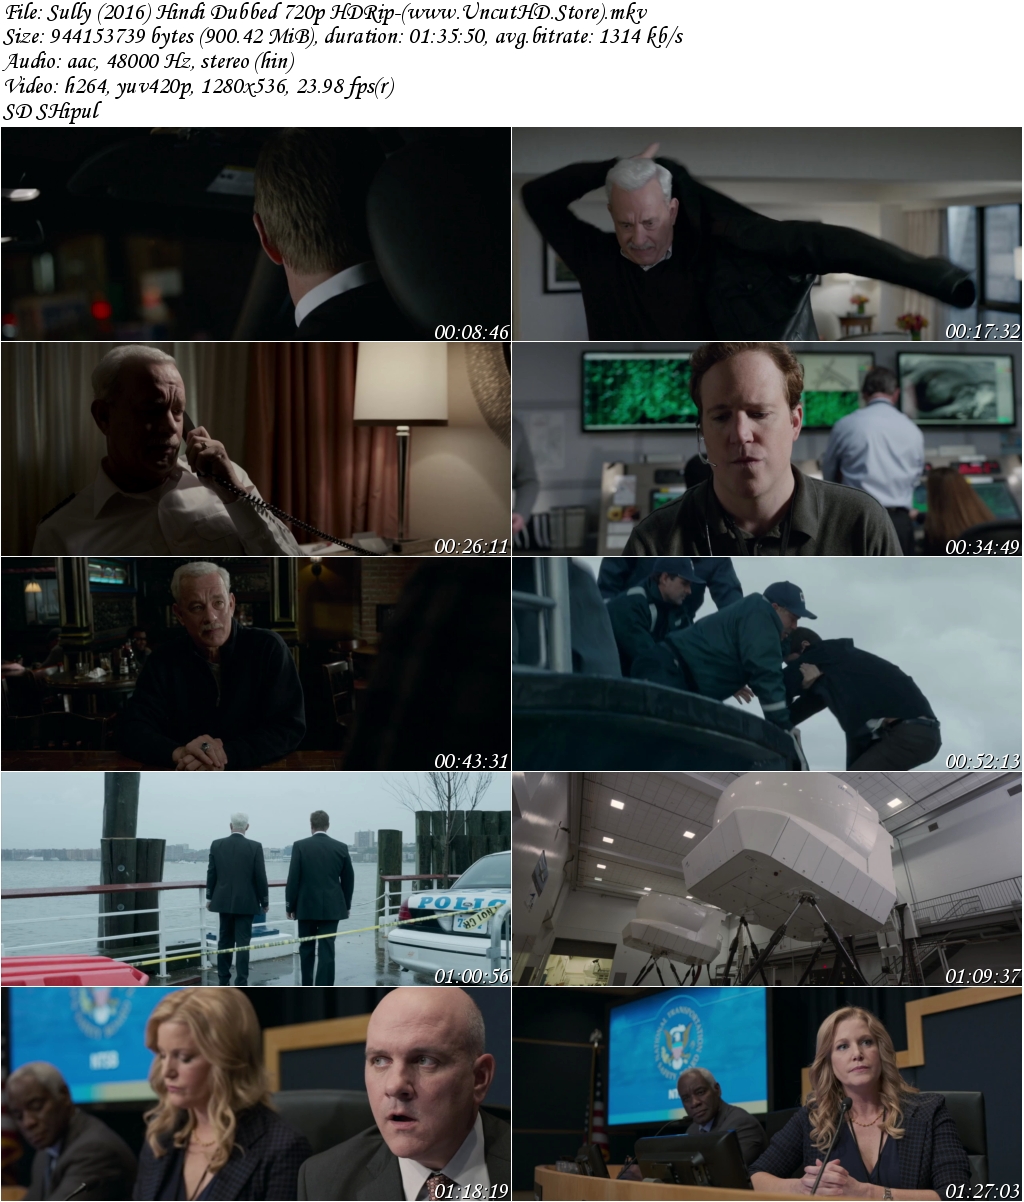 Sully20201620Hindi20Dubbed20720p20HDRip www.UncutHD.Store